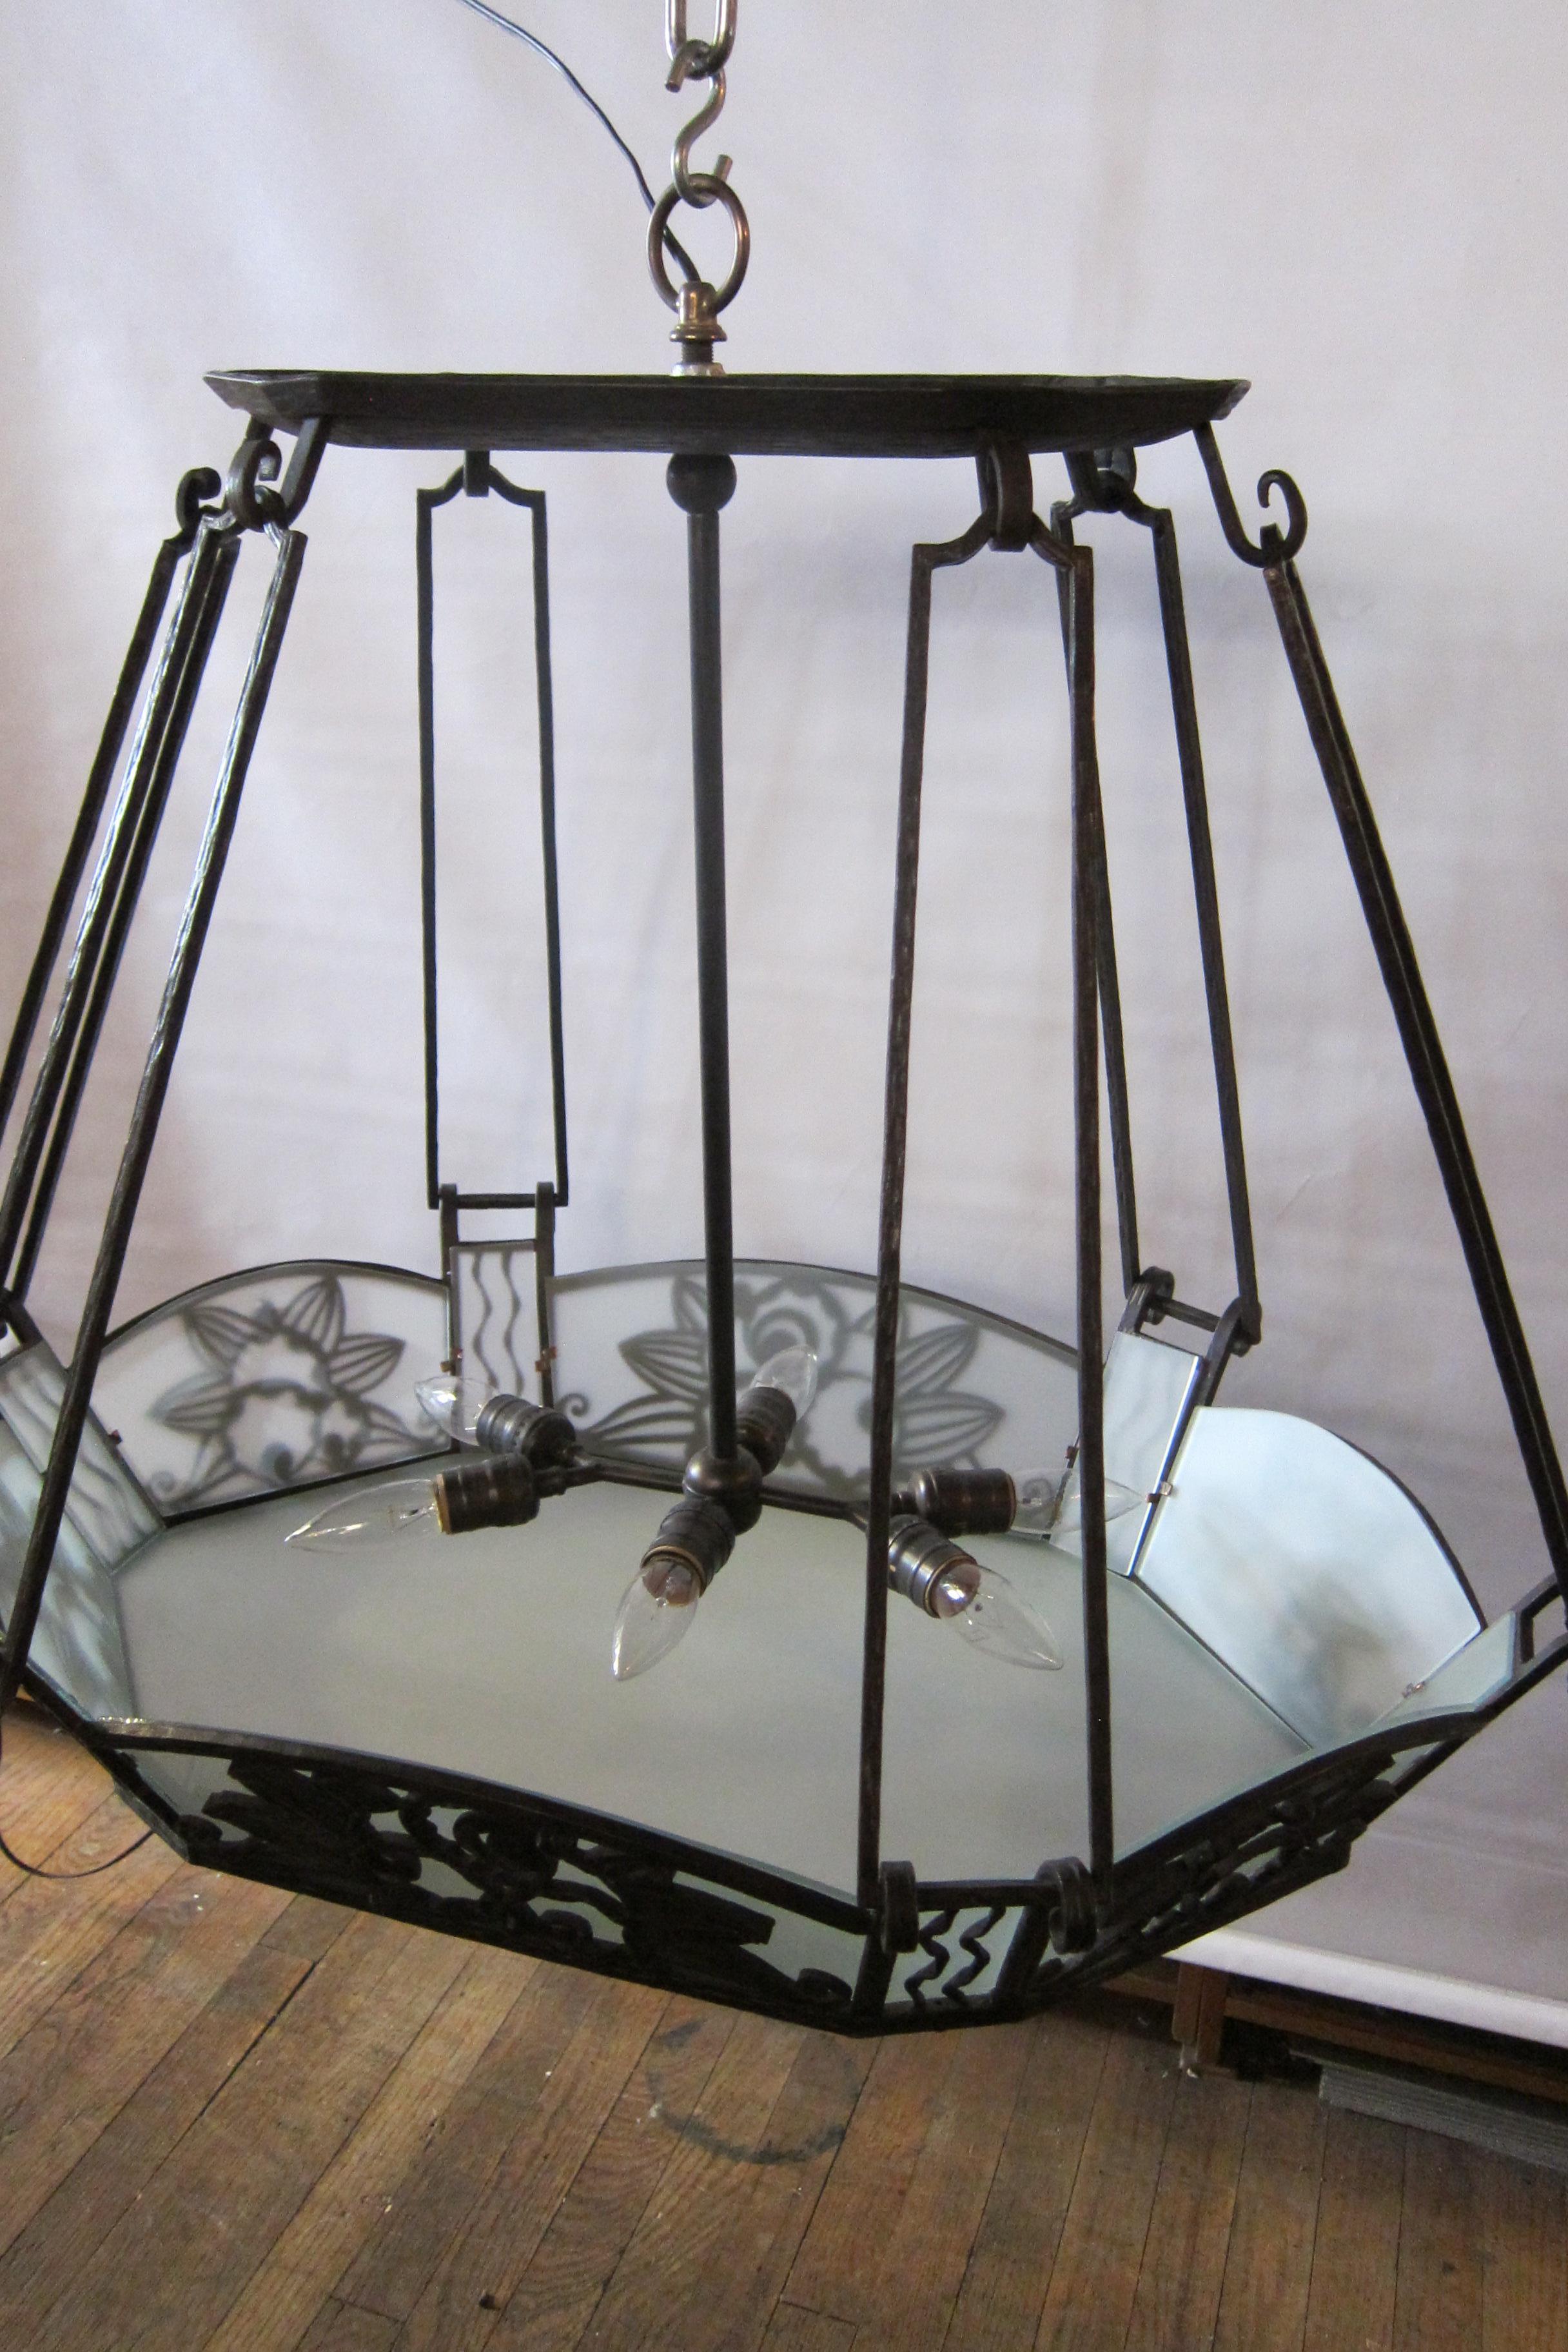 Paul Kiss Wrought Iron and Glass Hanging Fixture 2